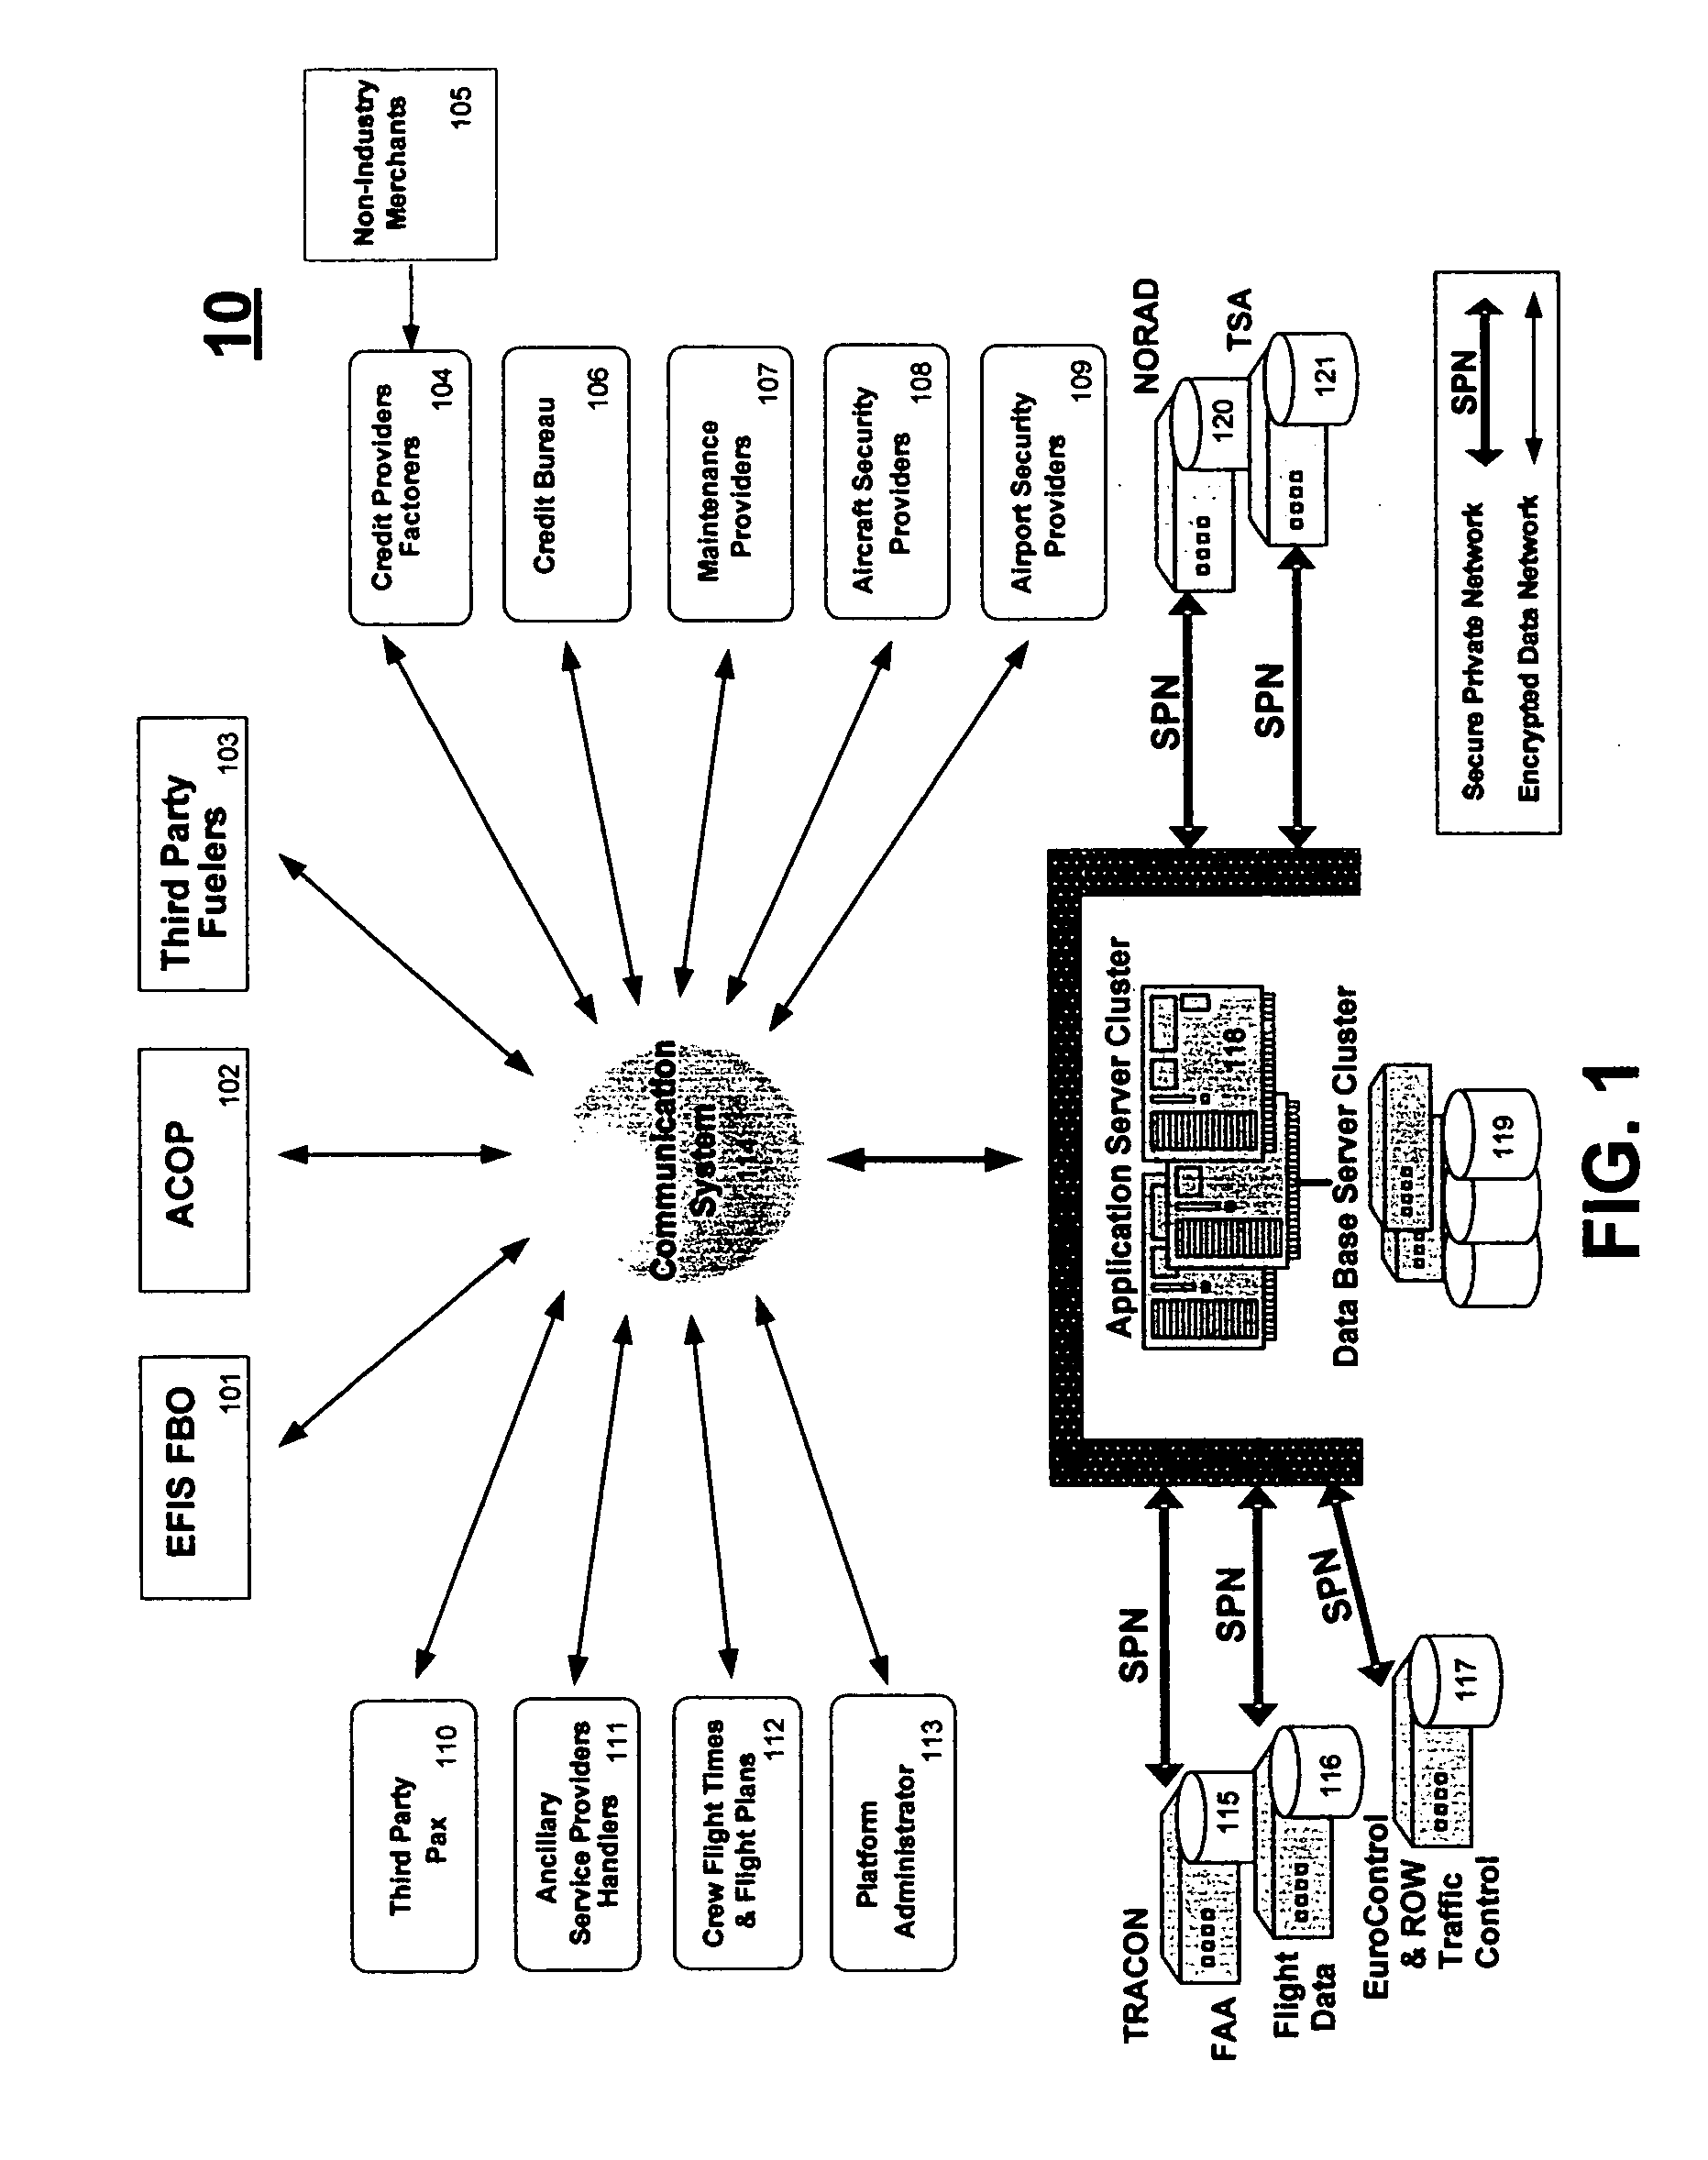 Method and apparatus for facilitating information, security and transaction exchange in aviation